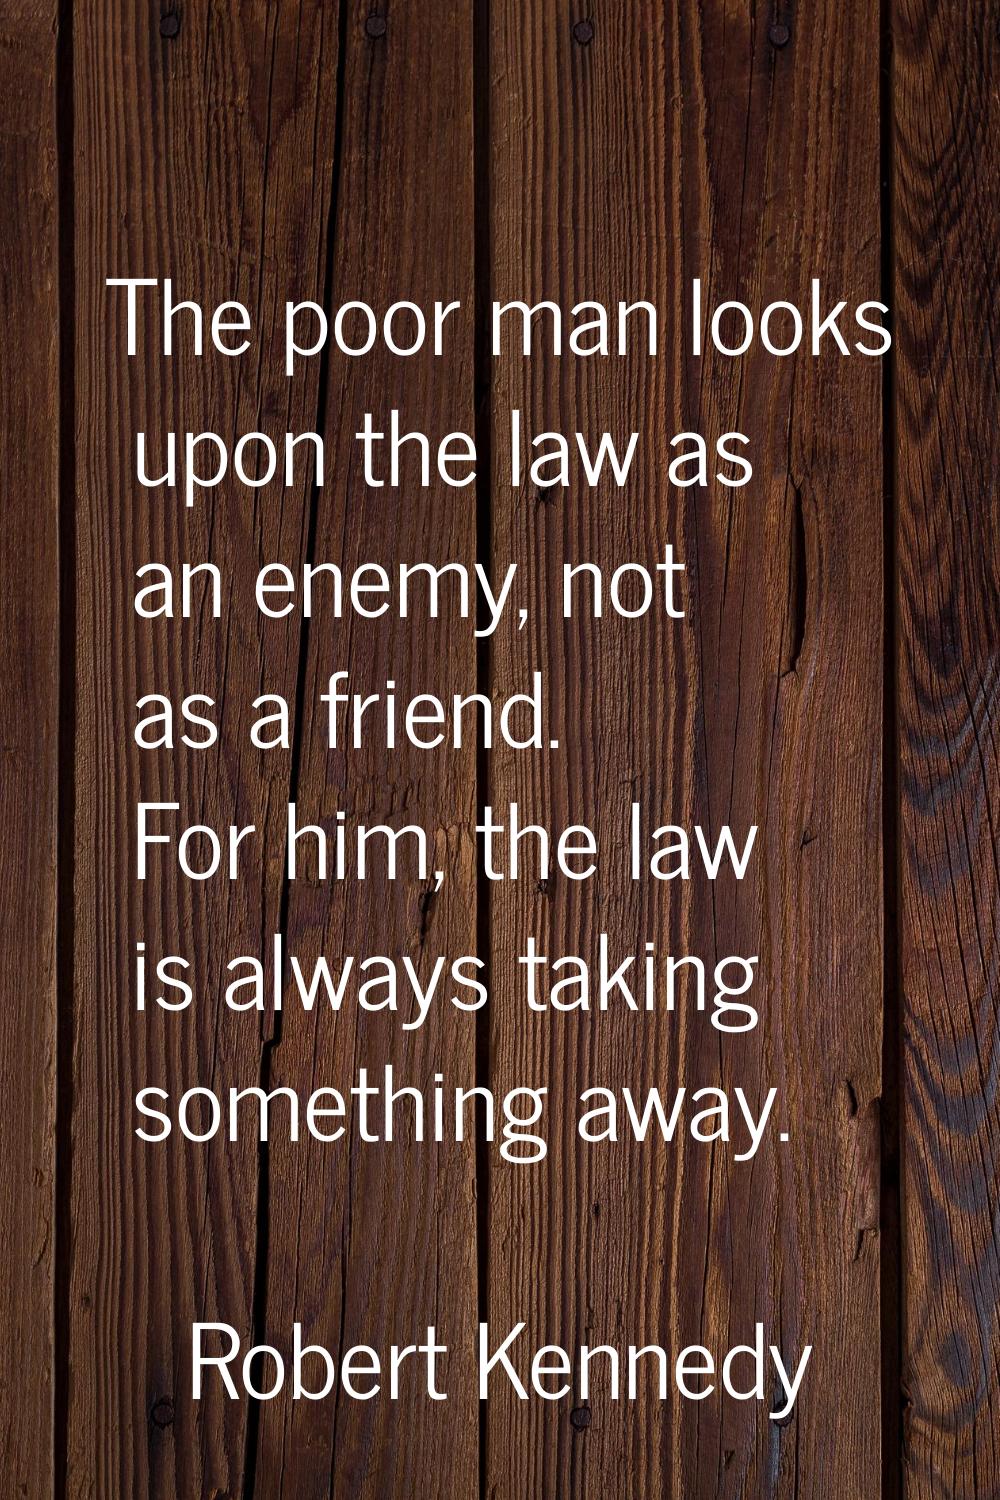 The poor man looks upon the law as an enemy, not as a friend. For him, the law is always taking som